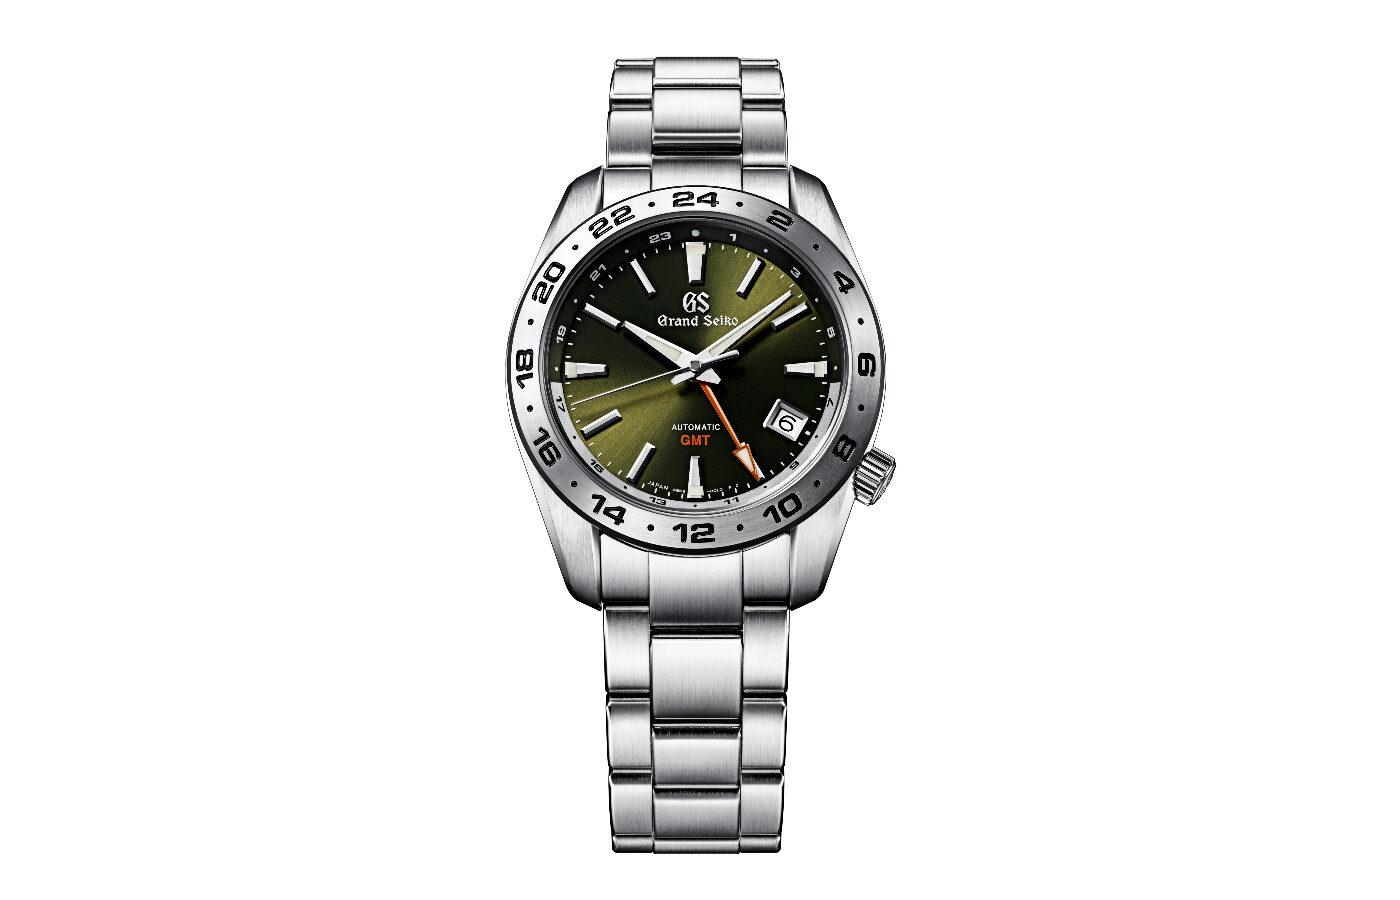 Grand Seiko Sport Collection GMT Triple Time Zone Watch